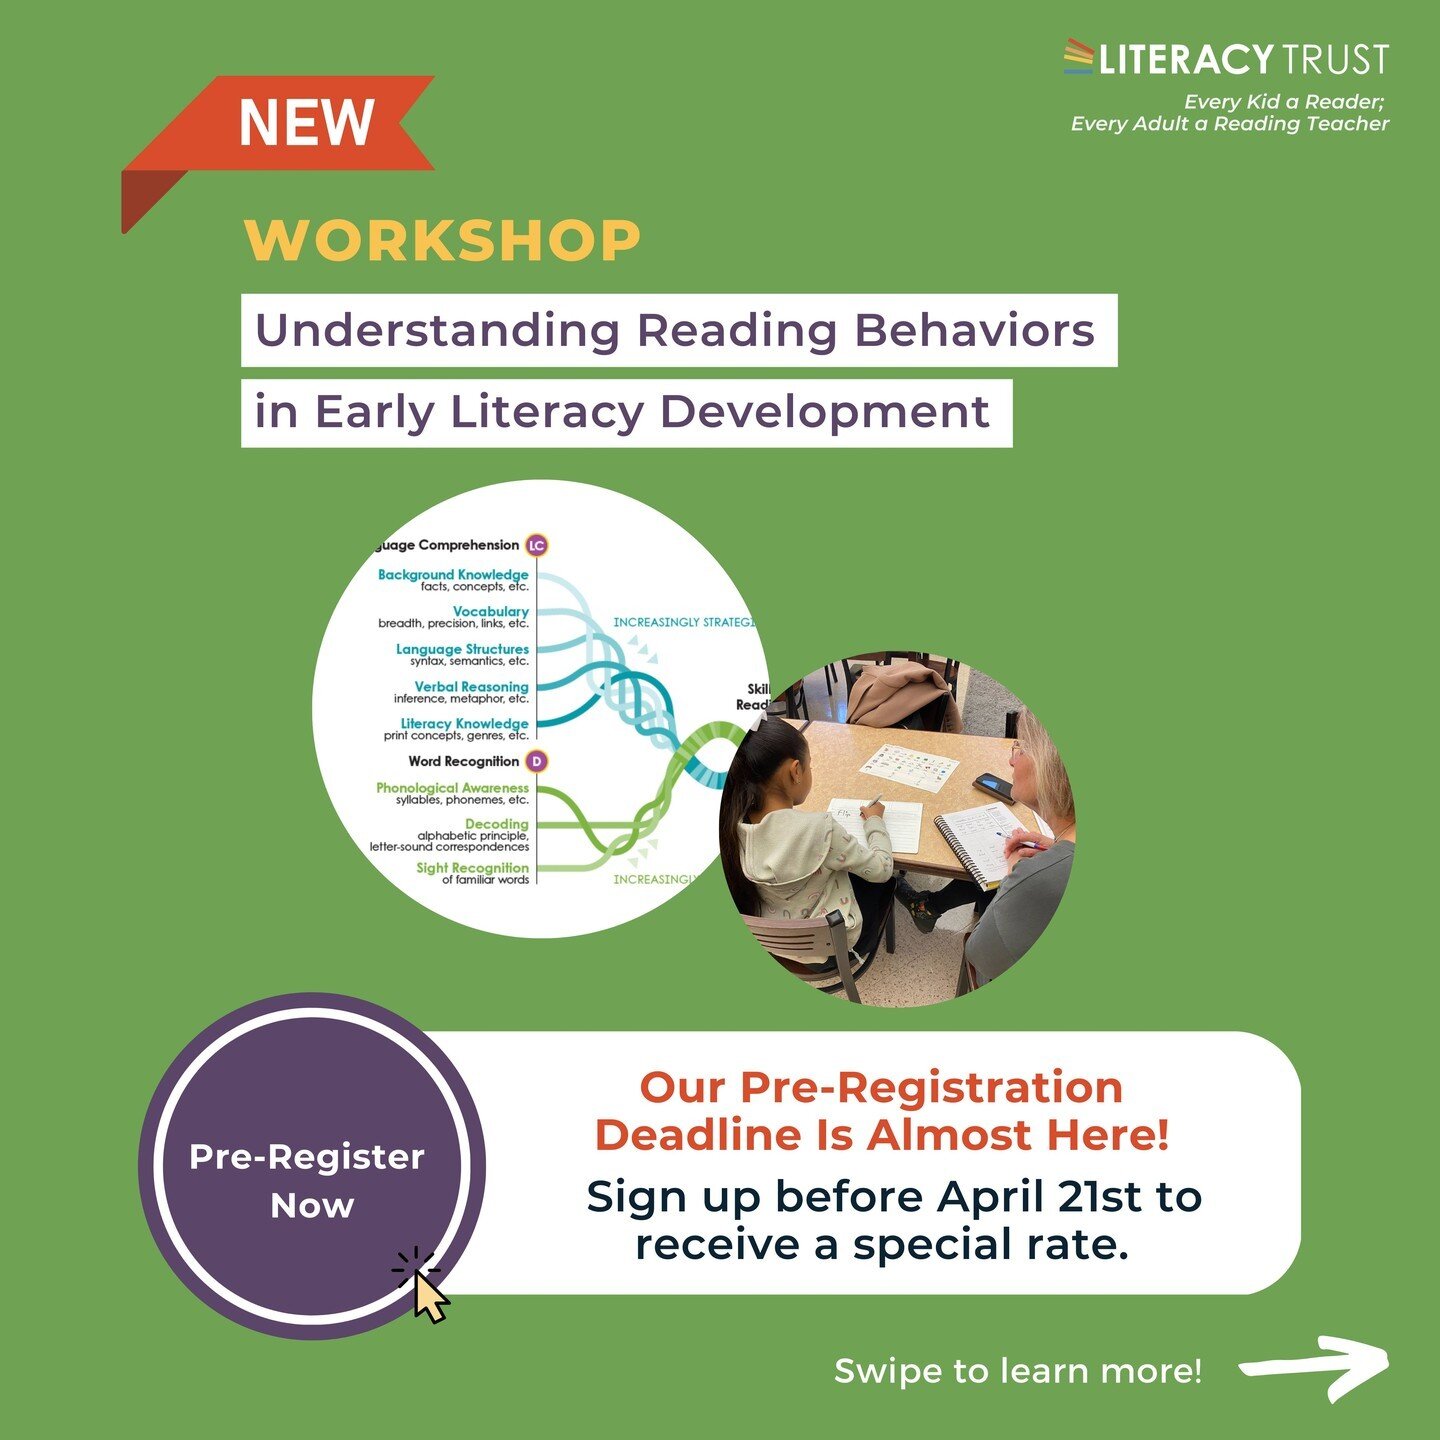 New workshop alert! ⚠️ To meet our readers where they&rsquo;re at, we need to understand how to match their reading behaviors with effective prompting and practice. Join us for a session or series on the process of #reading and phases of #decoding sk